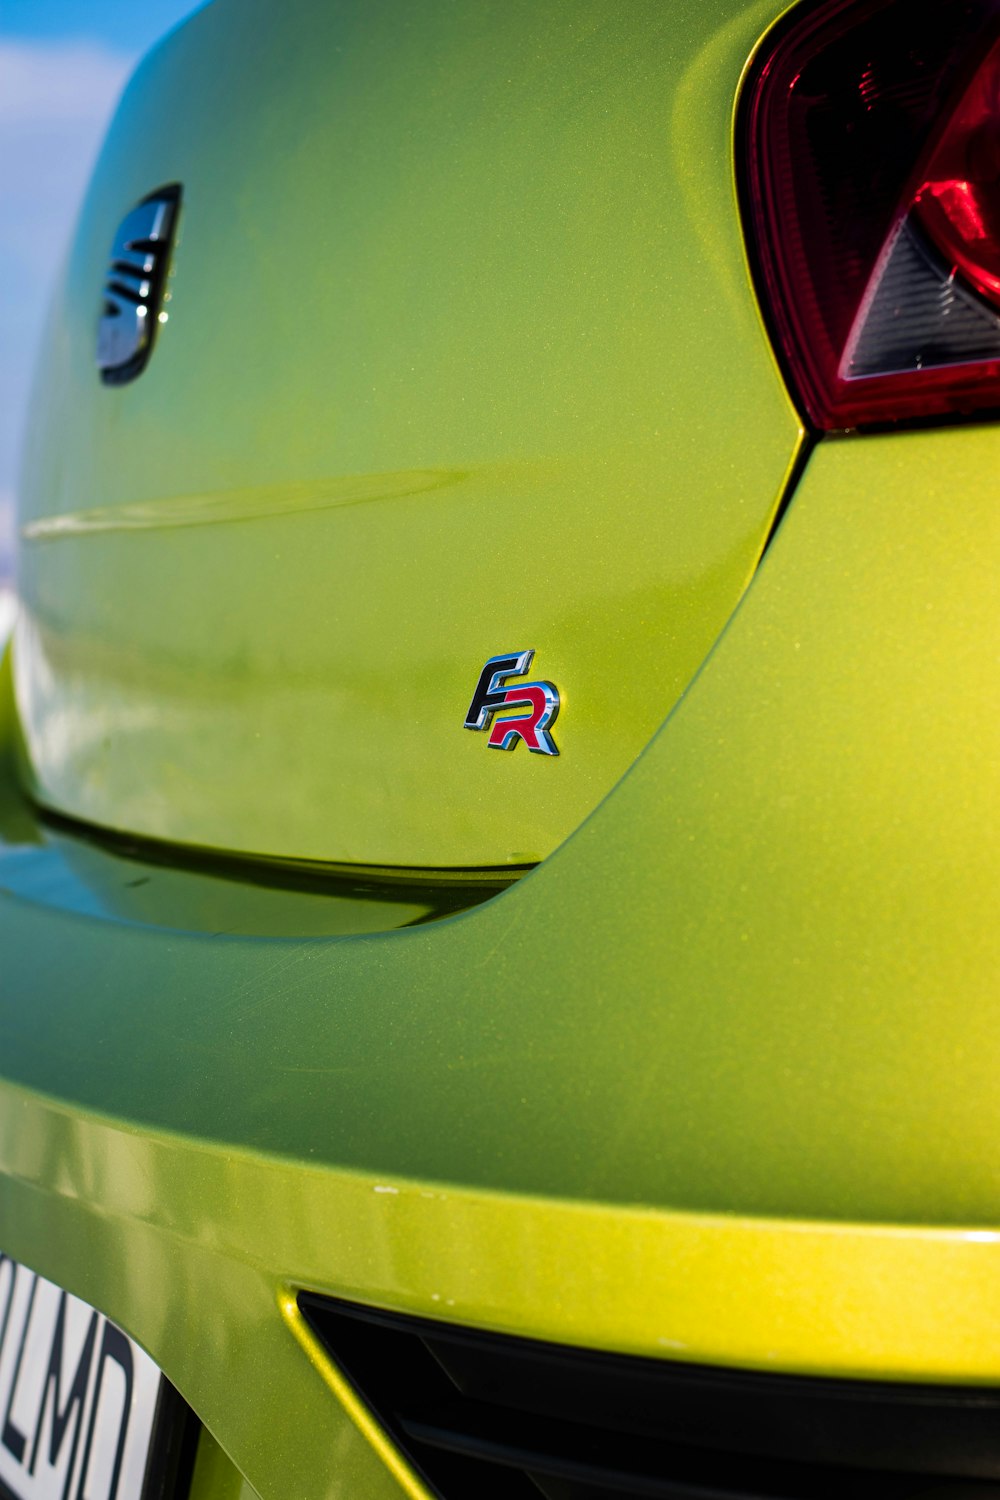 a close up of the tail end of a green sports car